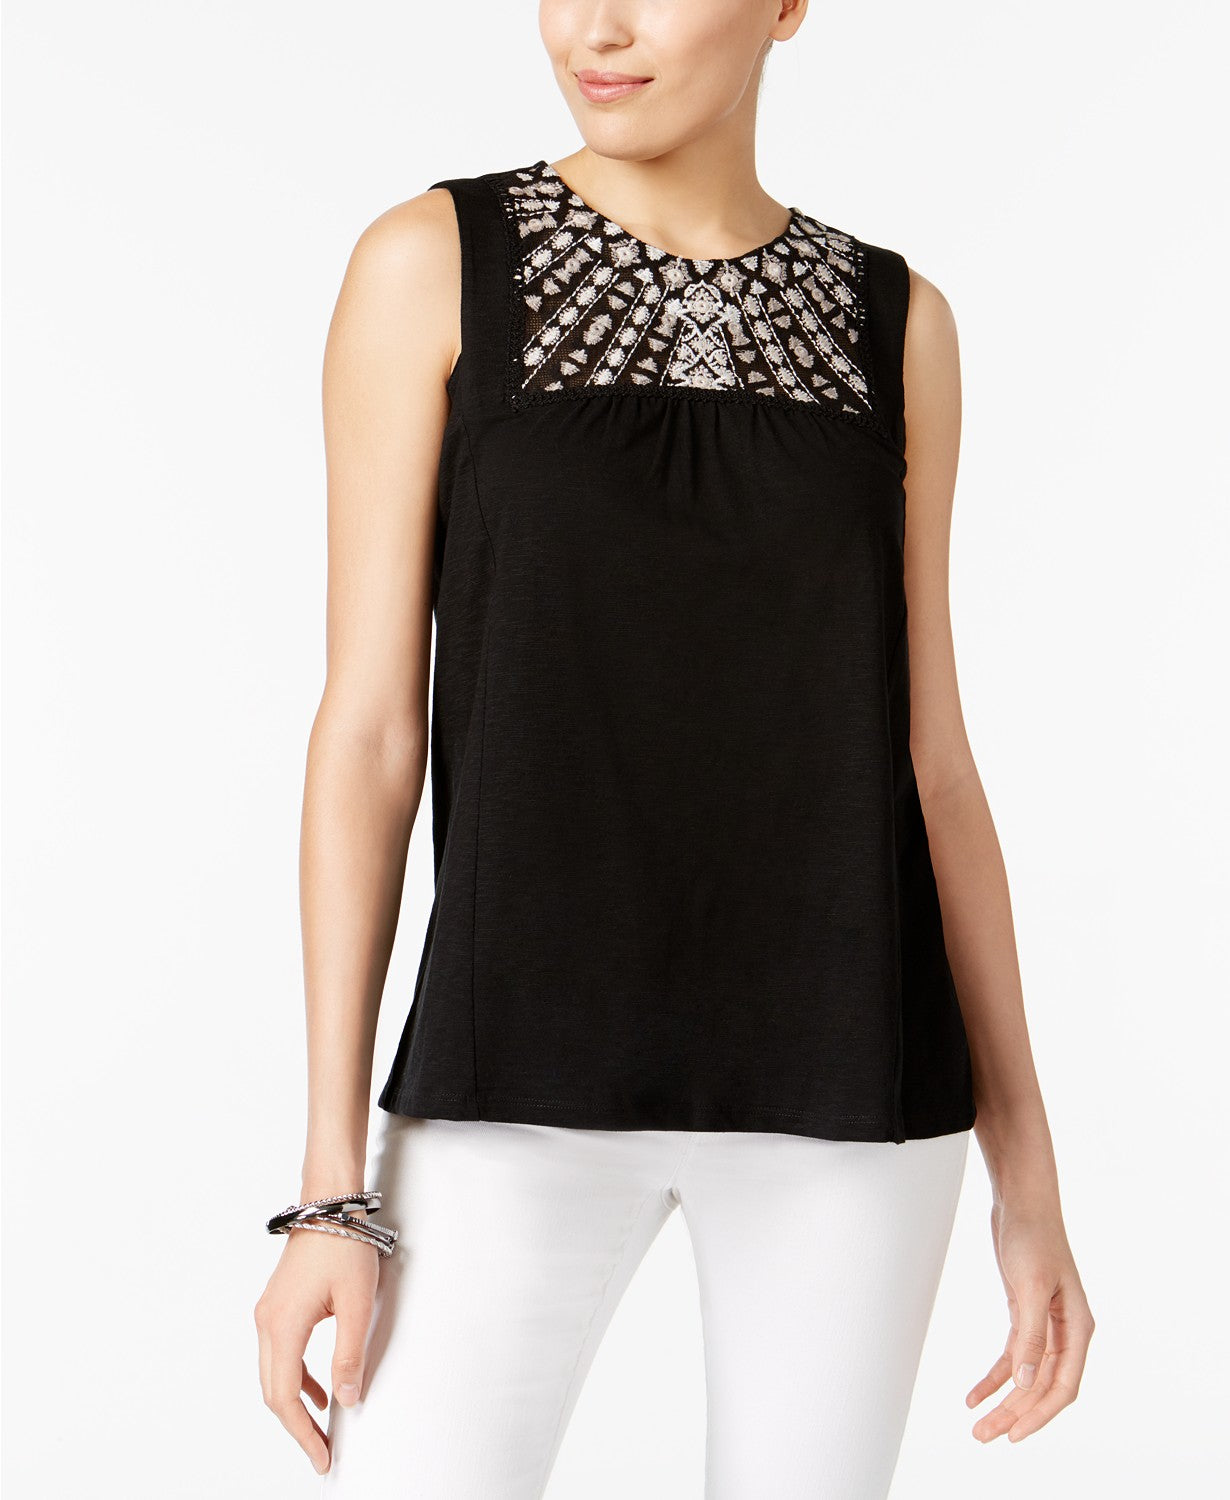 Style Co Embroidered Mesh Top Thailand Black L